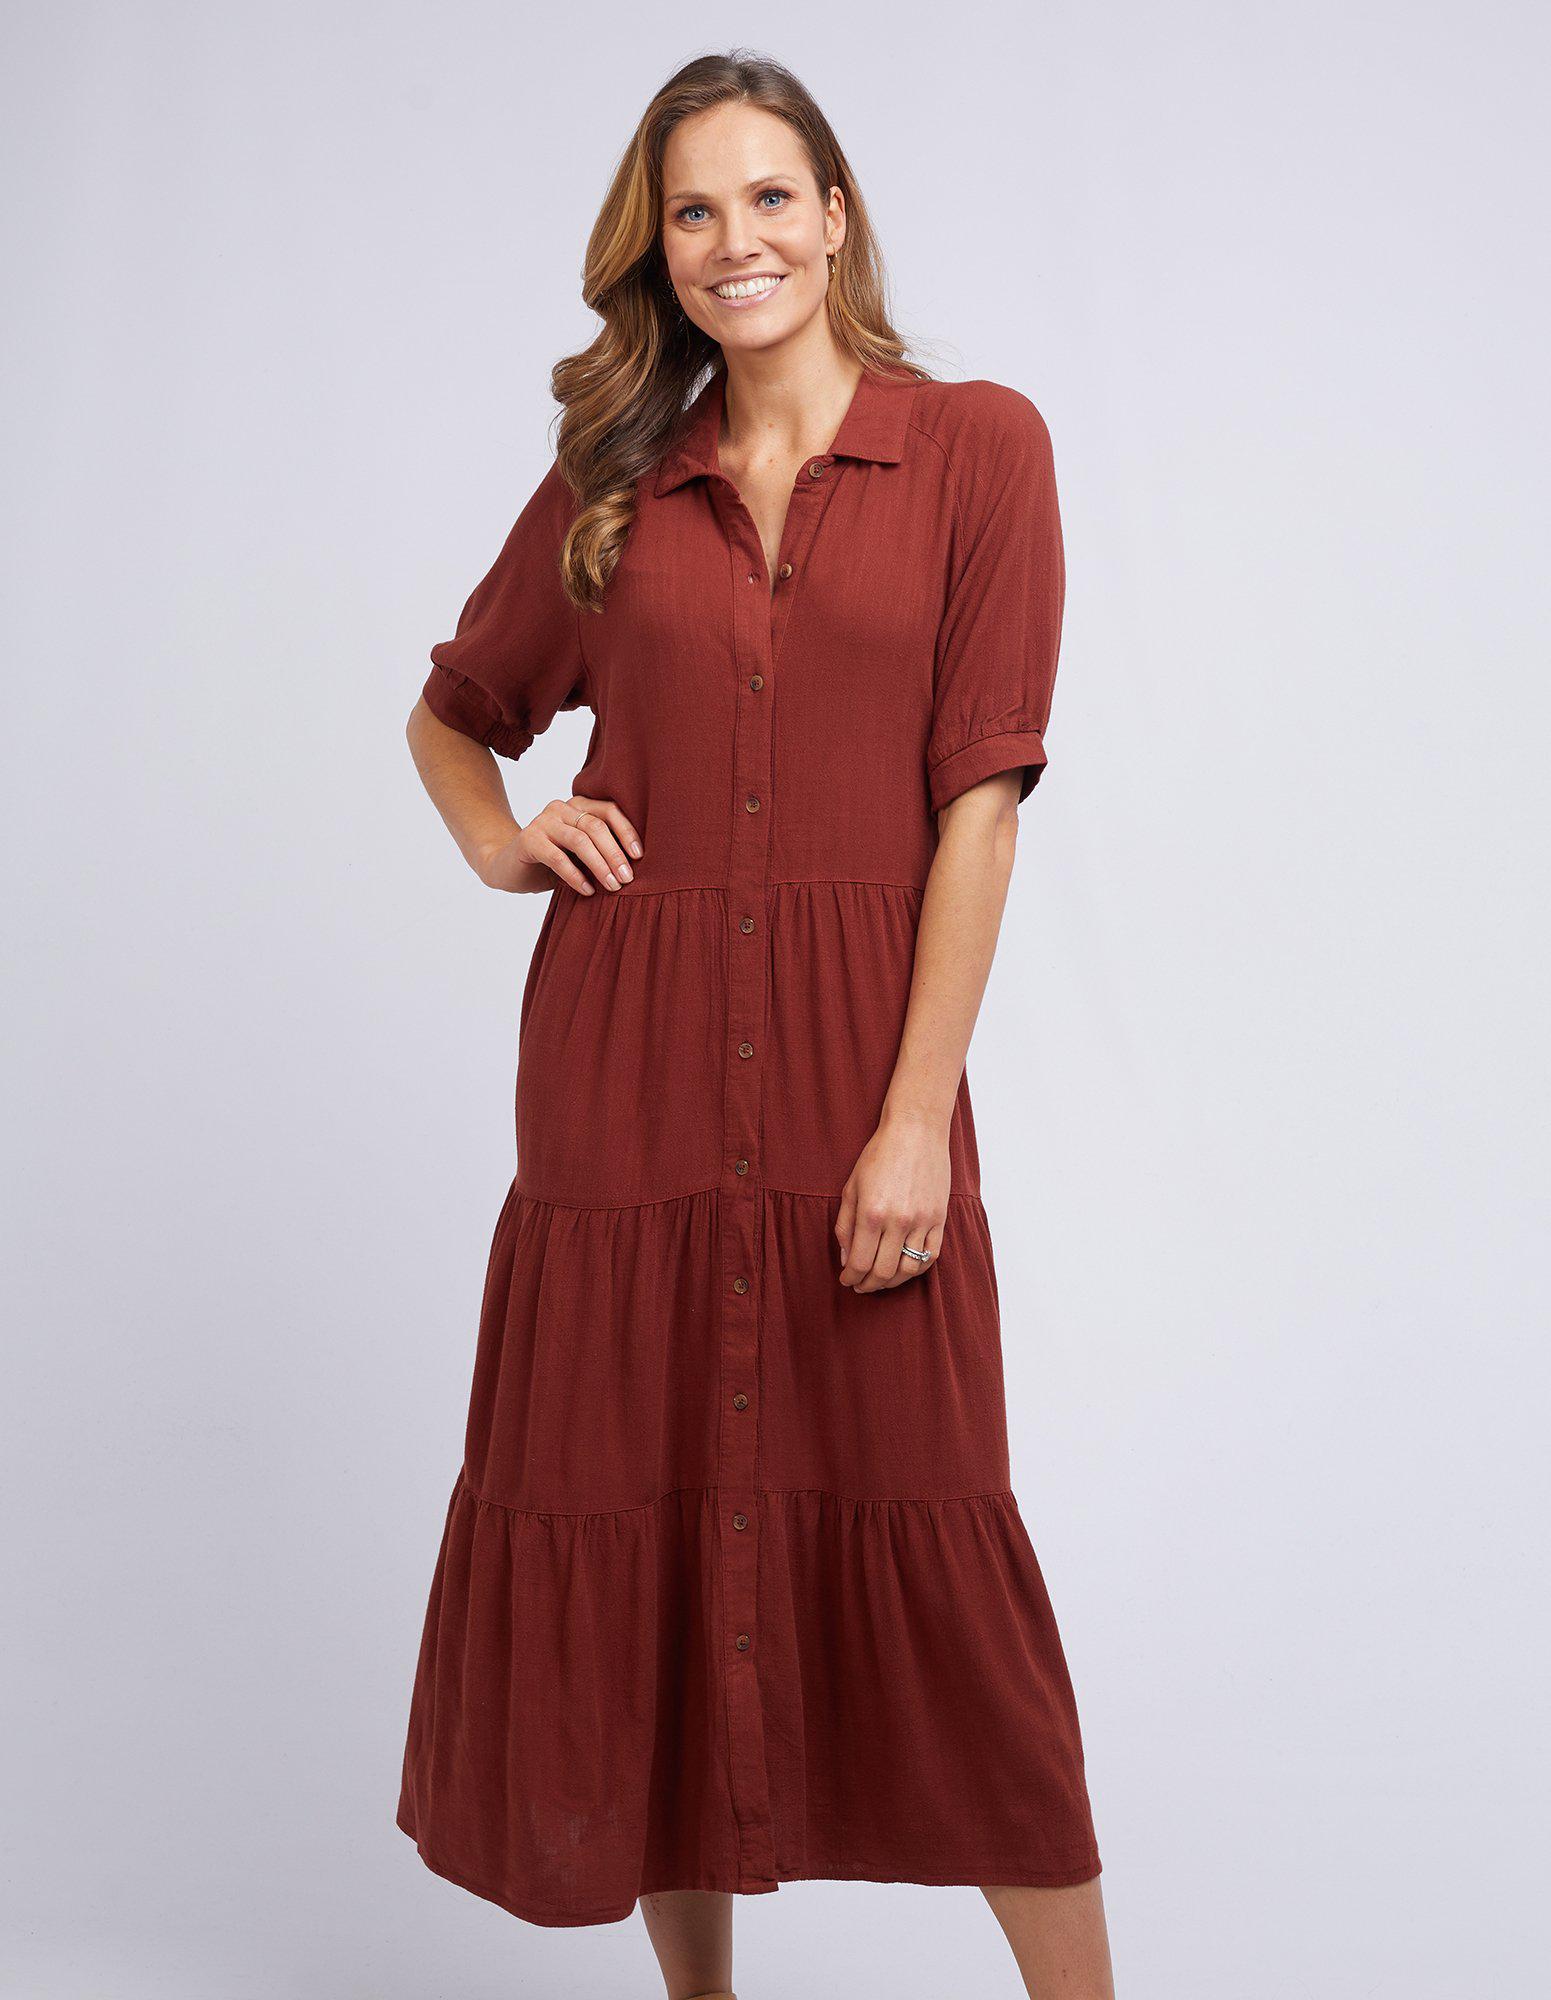 Sunny Days Dress - Rust - Foxwood - FUDGE Gifts Home Lifestyle